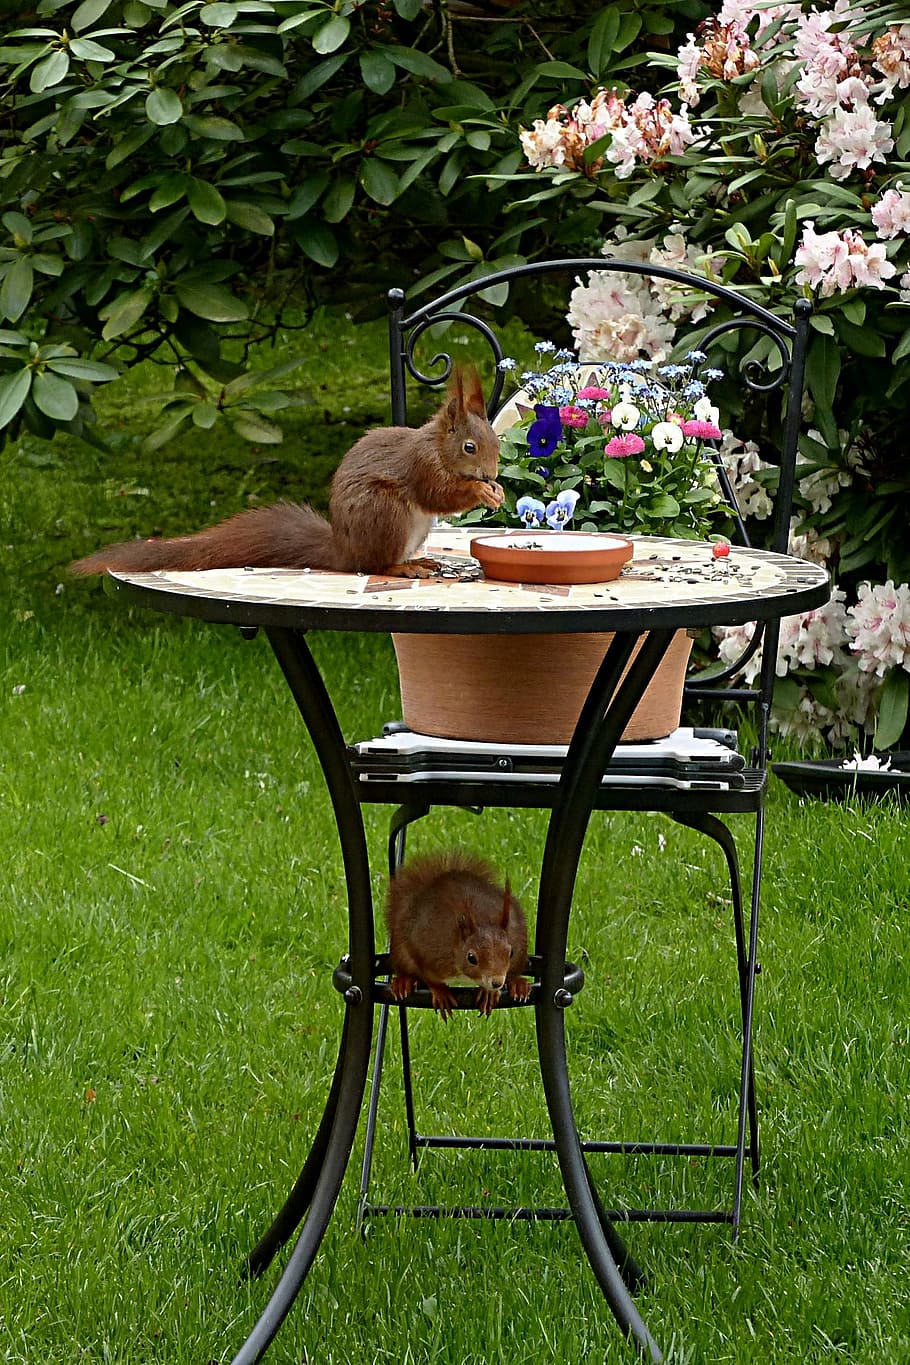 brown squirrel on top of table outdoors, animal, rodent, sciurus vulgaris major